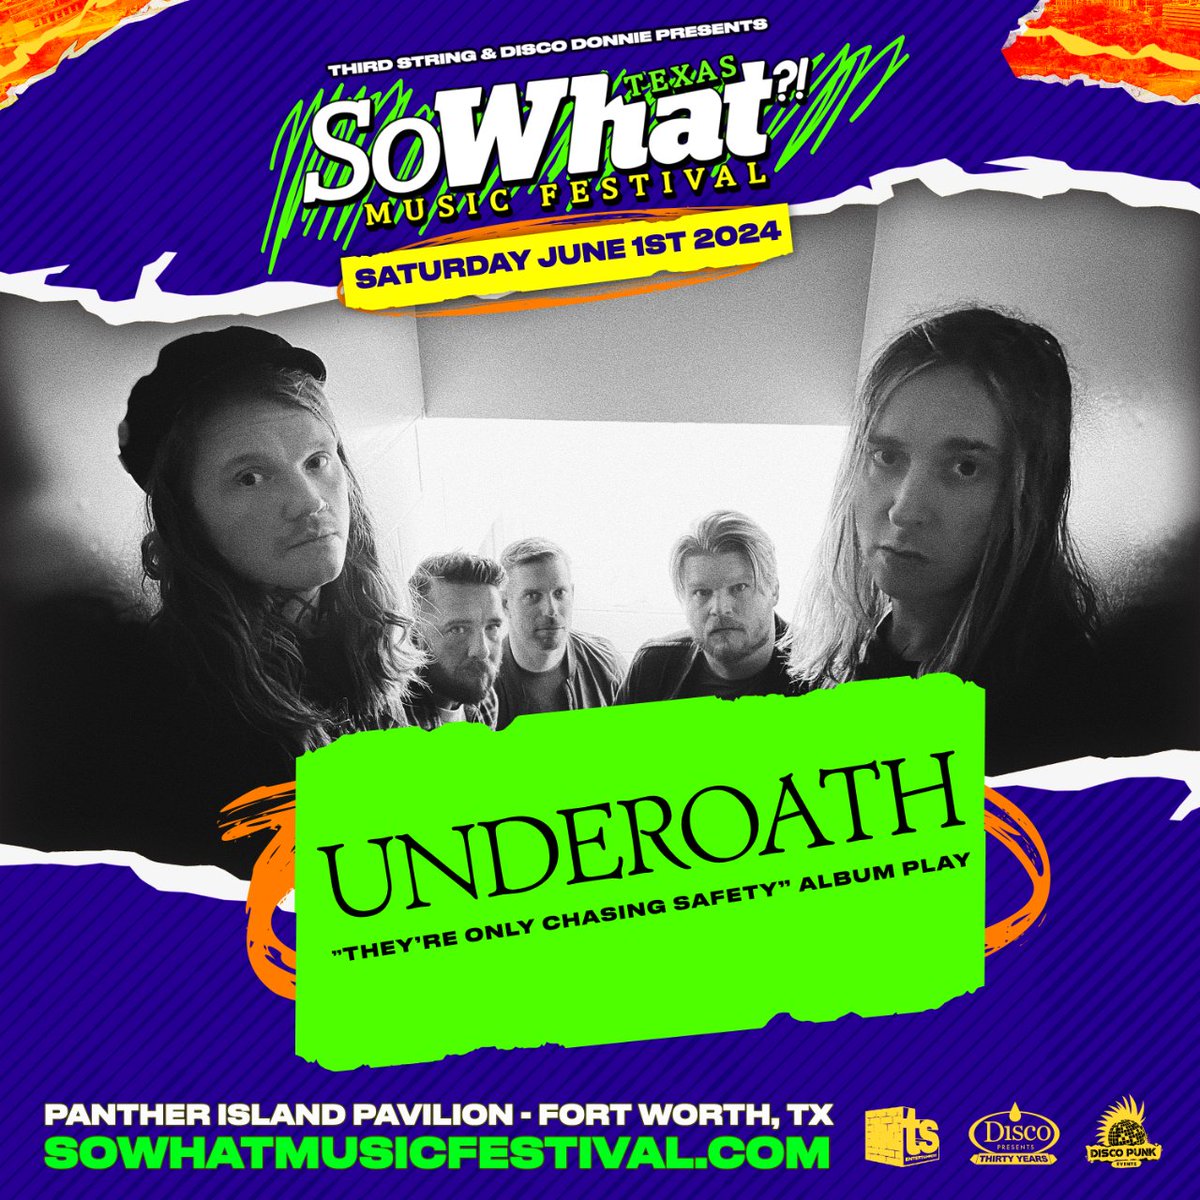 Just over 2 weeks til we're celebrating the 20th anniversary of the iconic @UnderoathBand album - They're Only Chasing Safety. What songs are you excited to scream your lungs out to? Don't miss out 🤘 sowhatmusicfestival.com